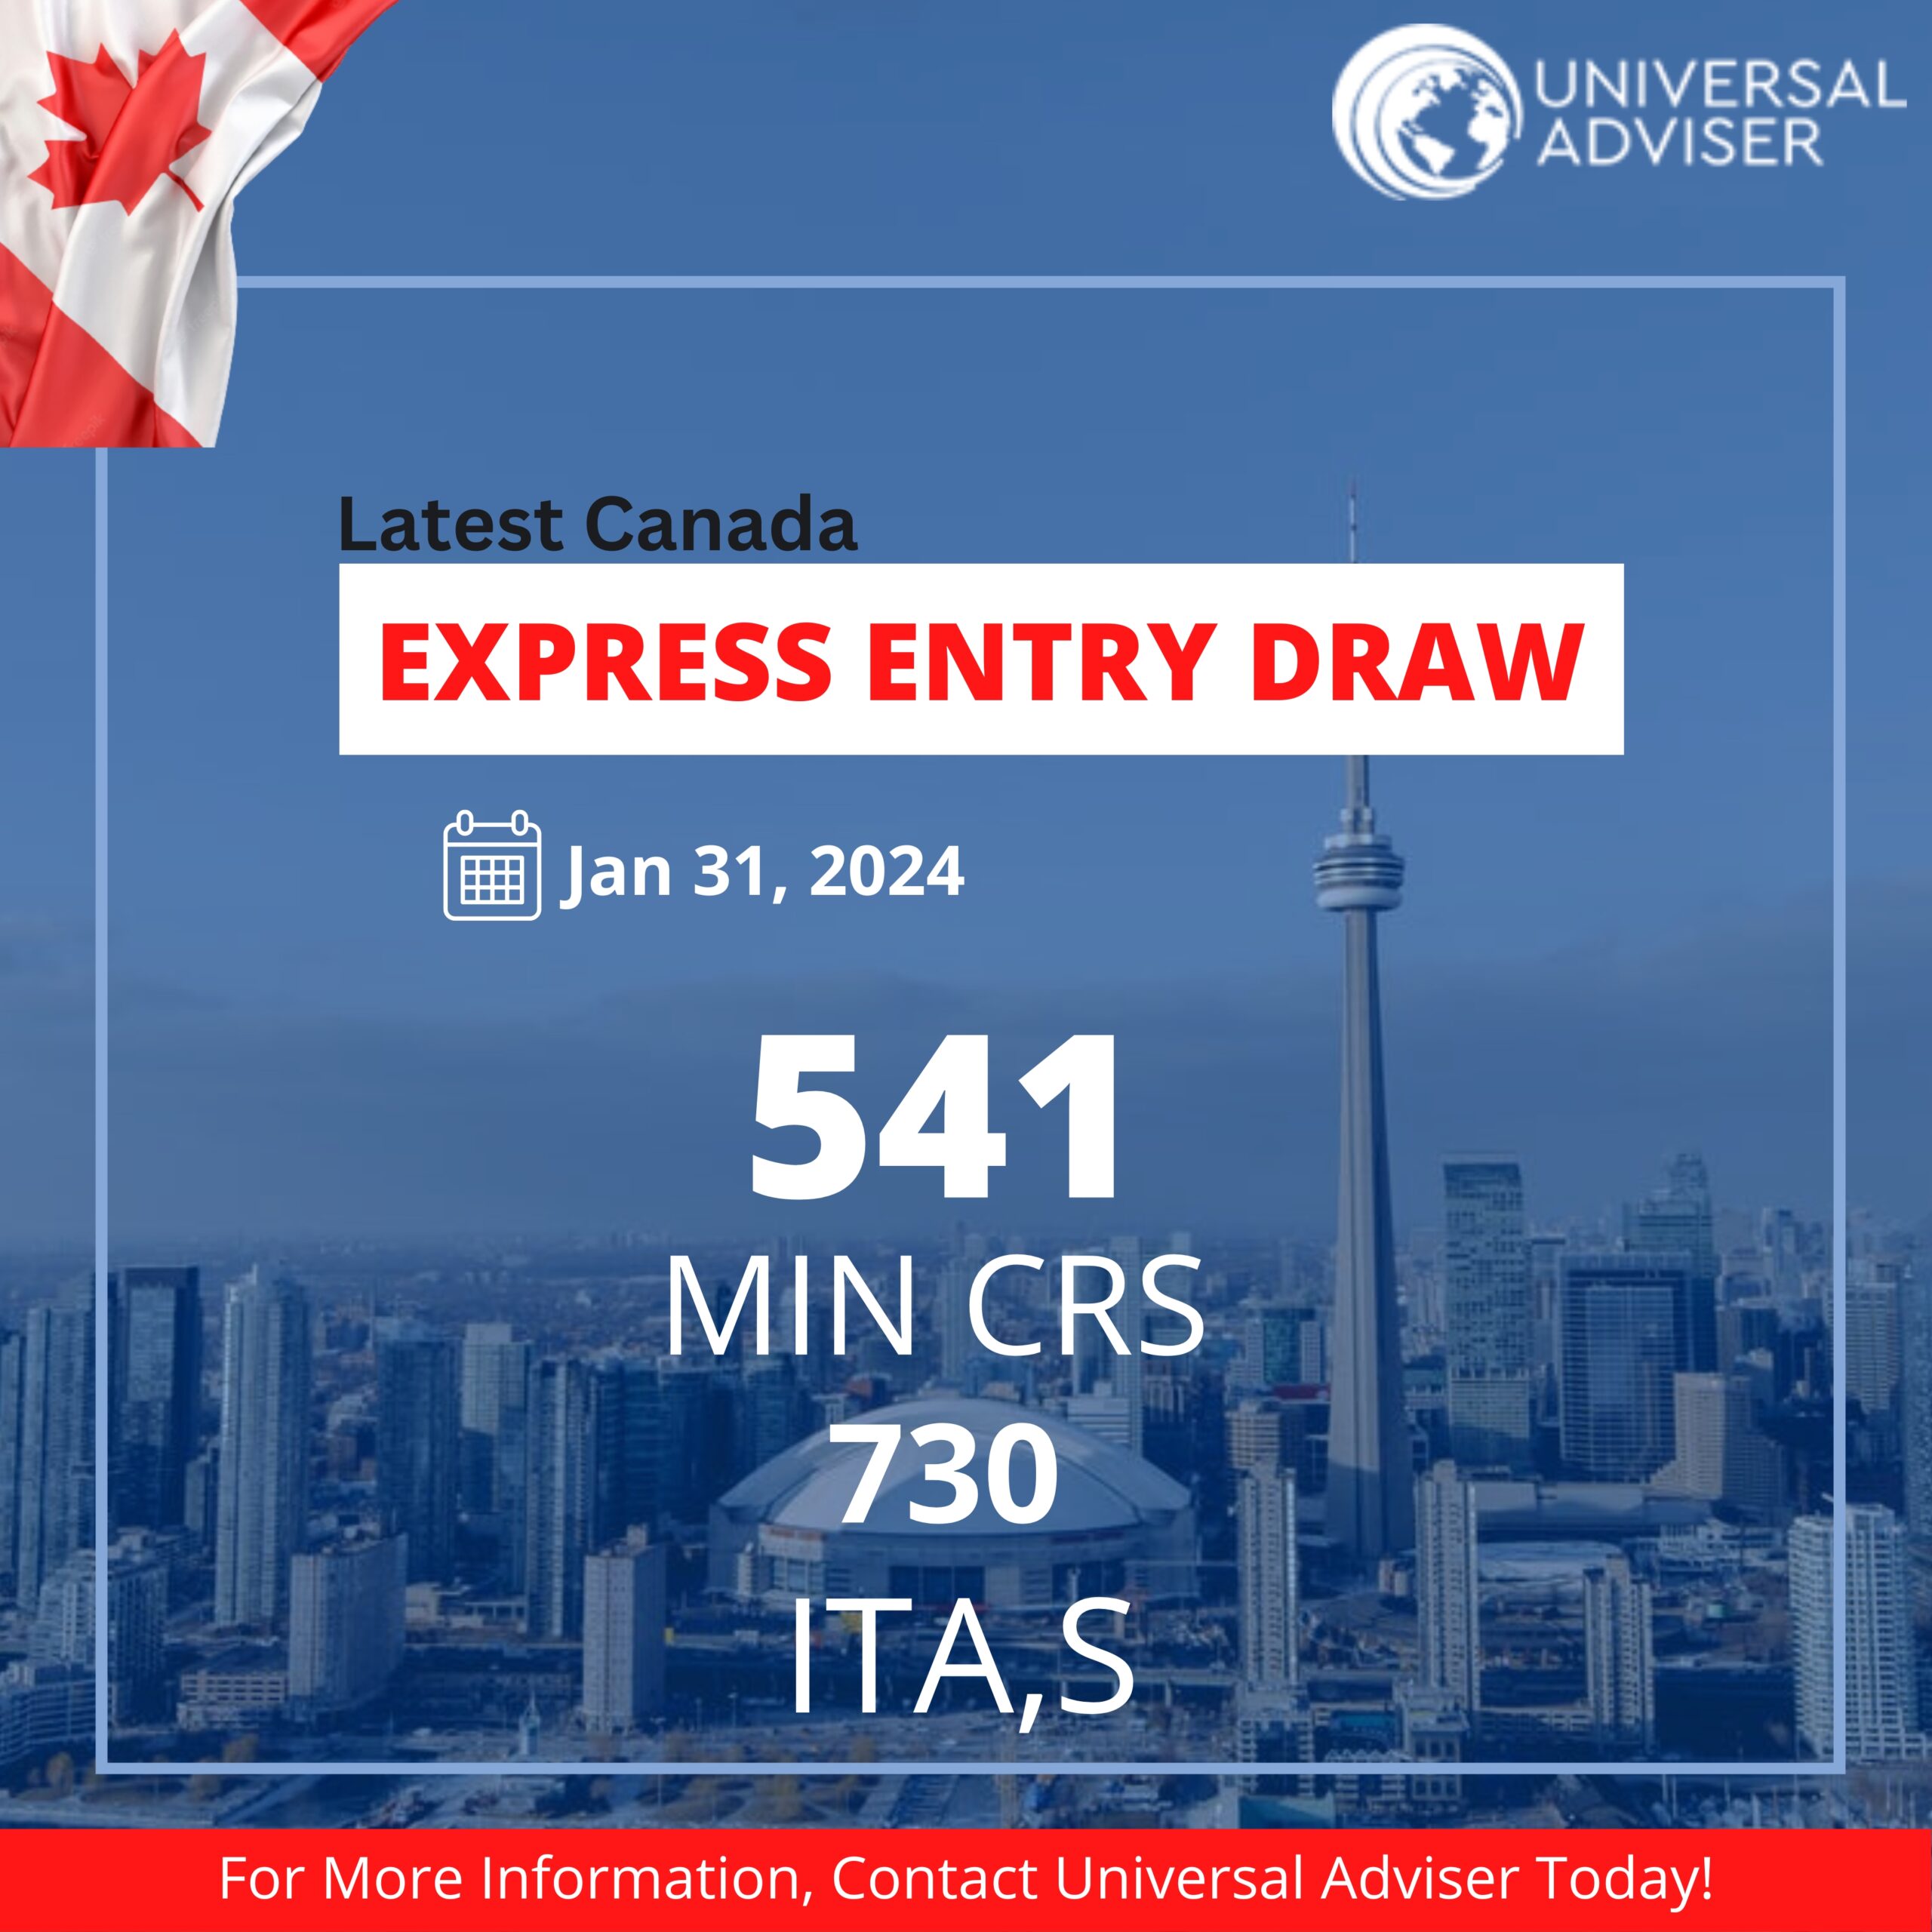 Canada Grants 730 Invitations to Apply (ITAs) in Latest Express Entry Draw